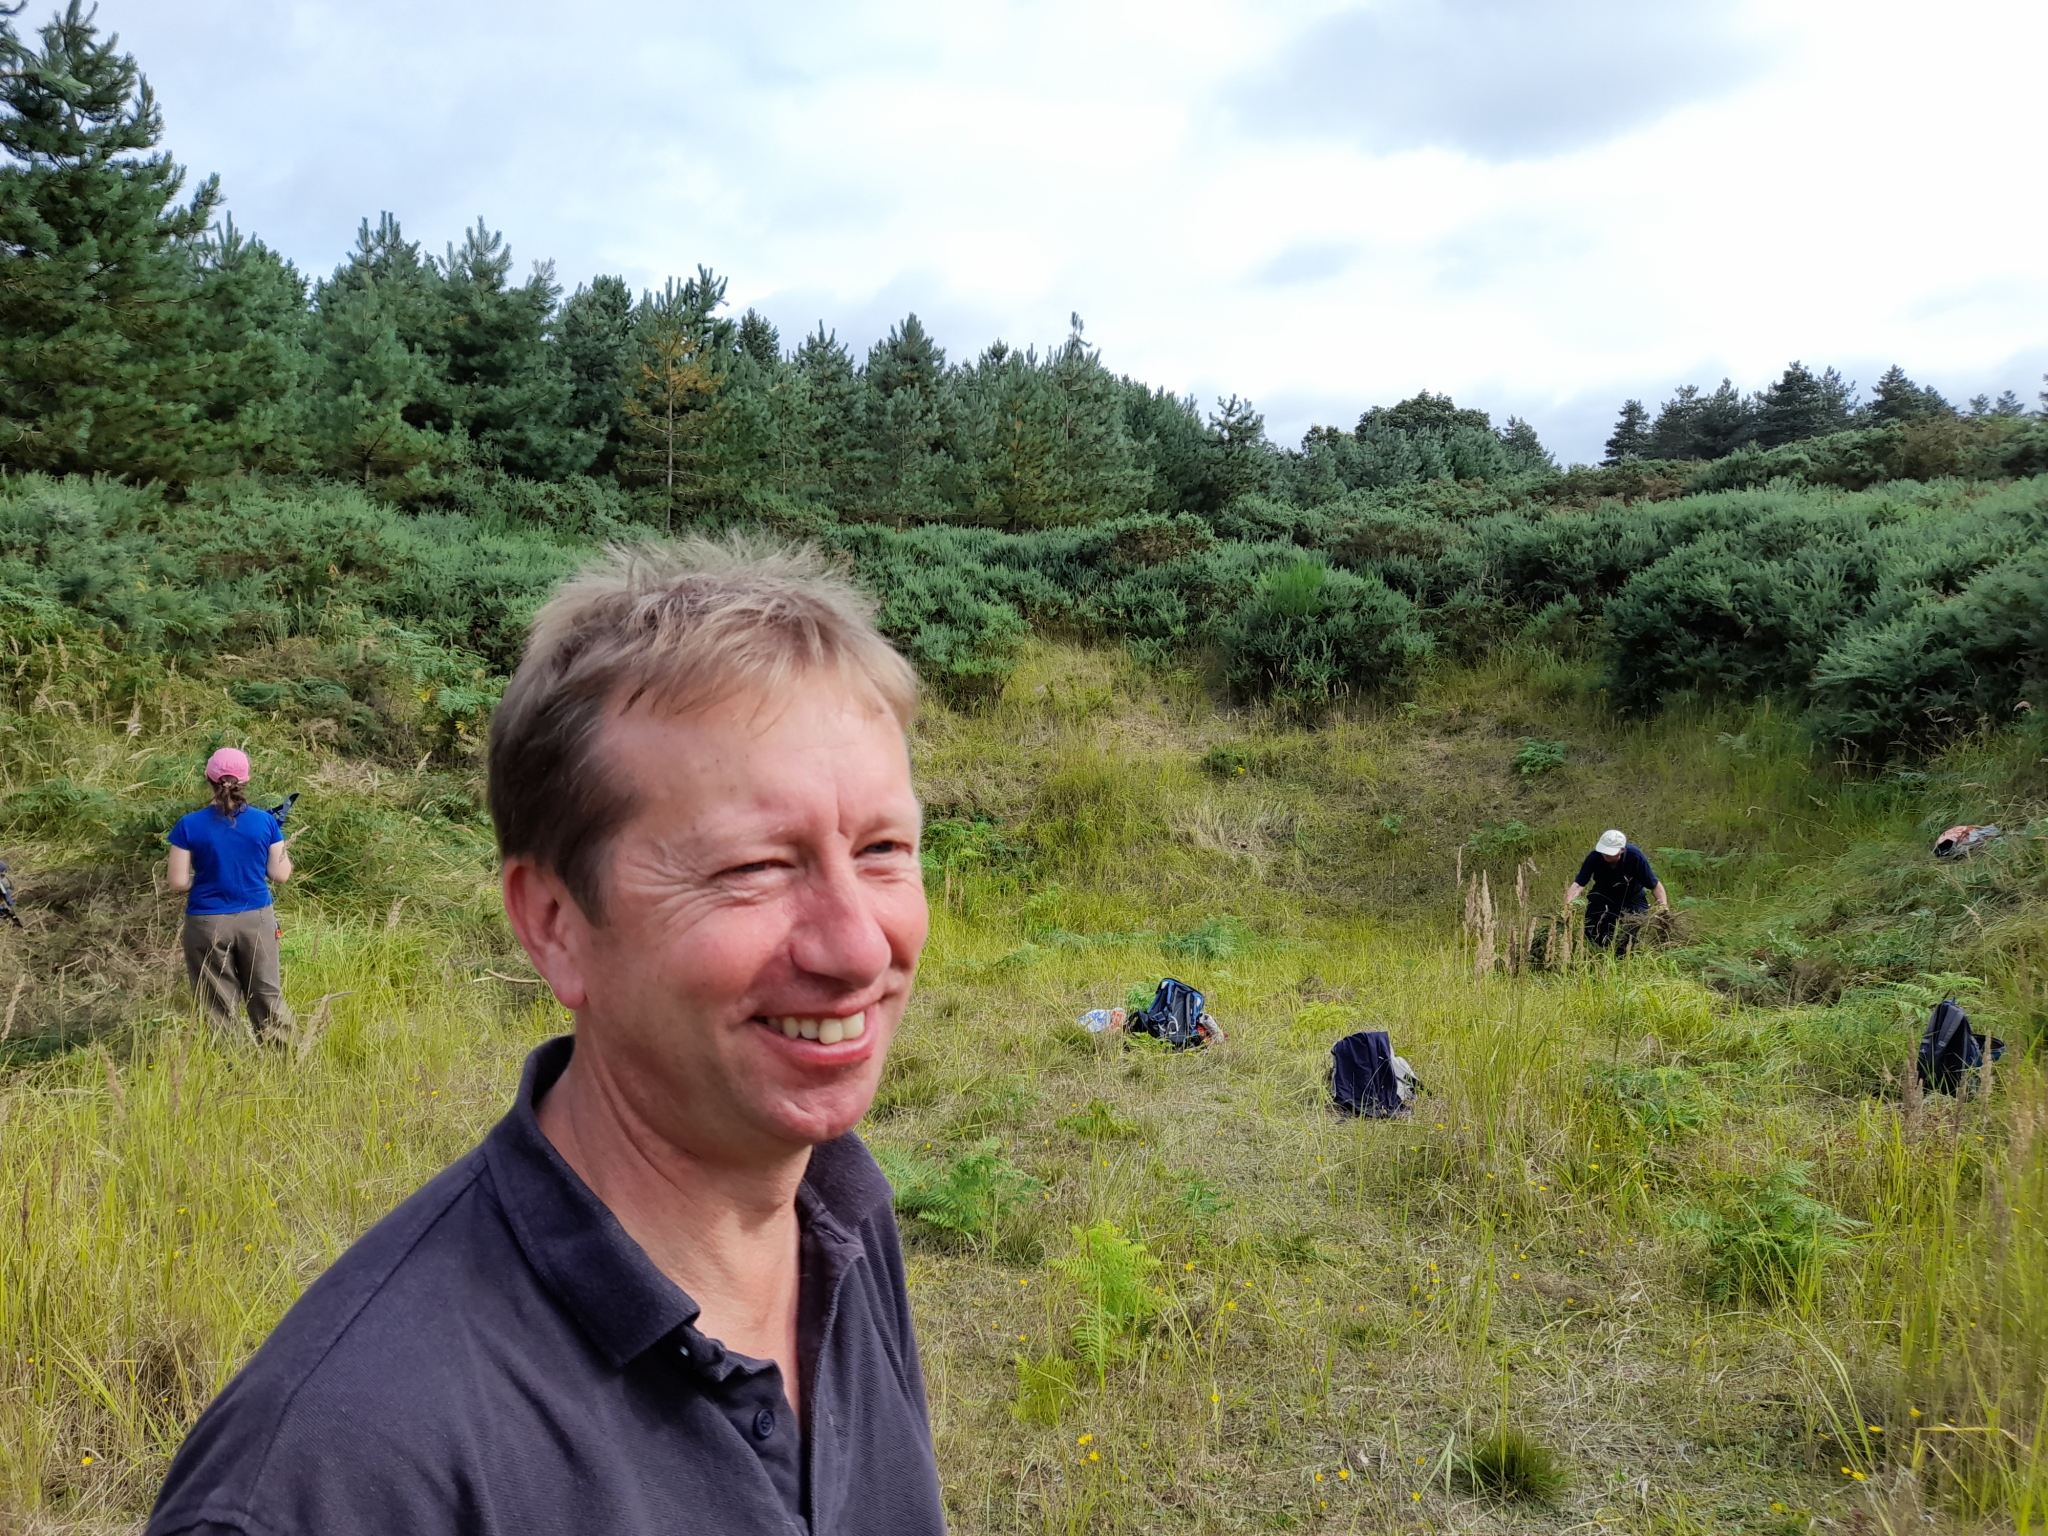 A photo from the FoTF Conservation Event - August 2021 - Maintenance tasks at Mildenhall Mugwort Pit & Mildenhall Warren Lodge : A volunteers smiles for the camera, while other volunteers work in Mildenhall Mugwort Pit in the background